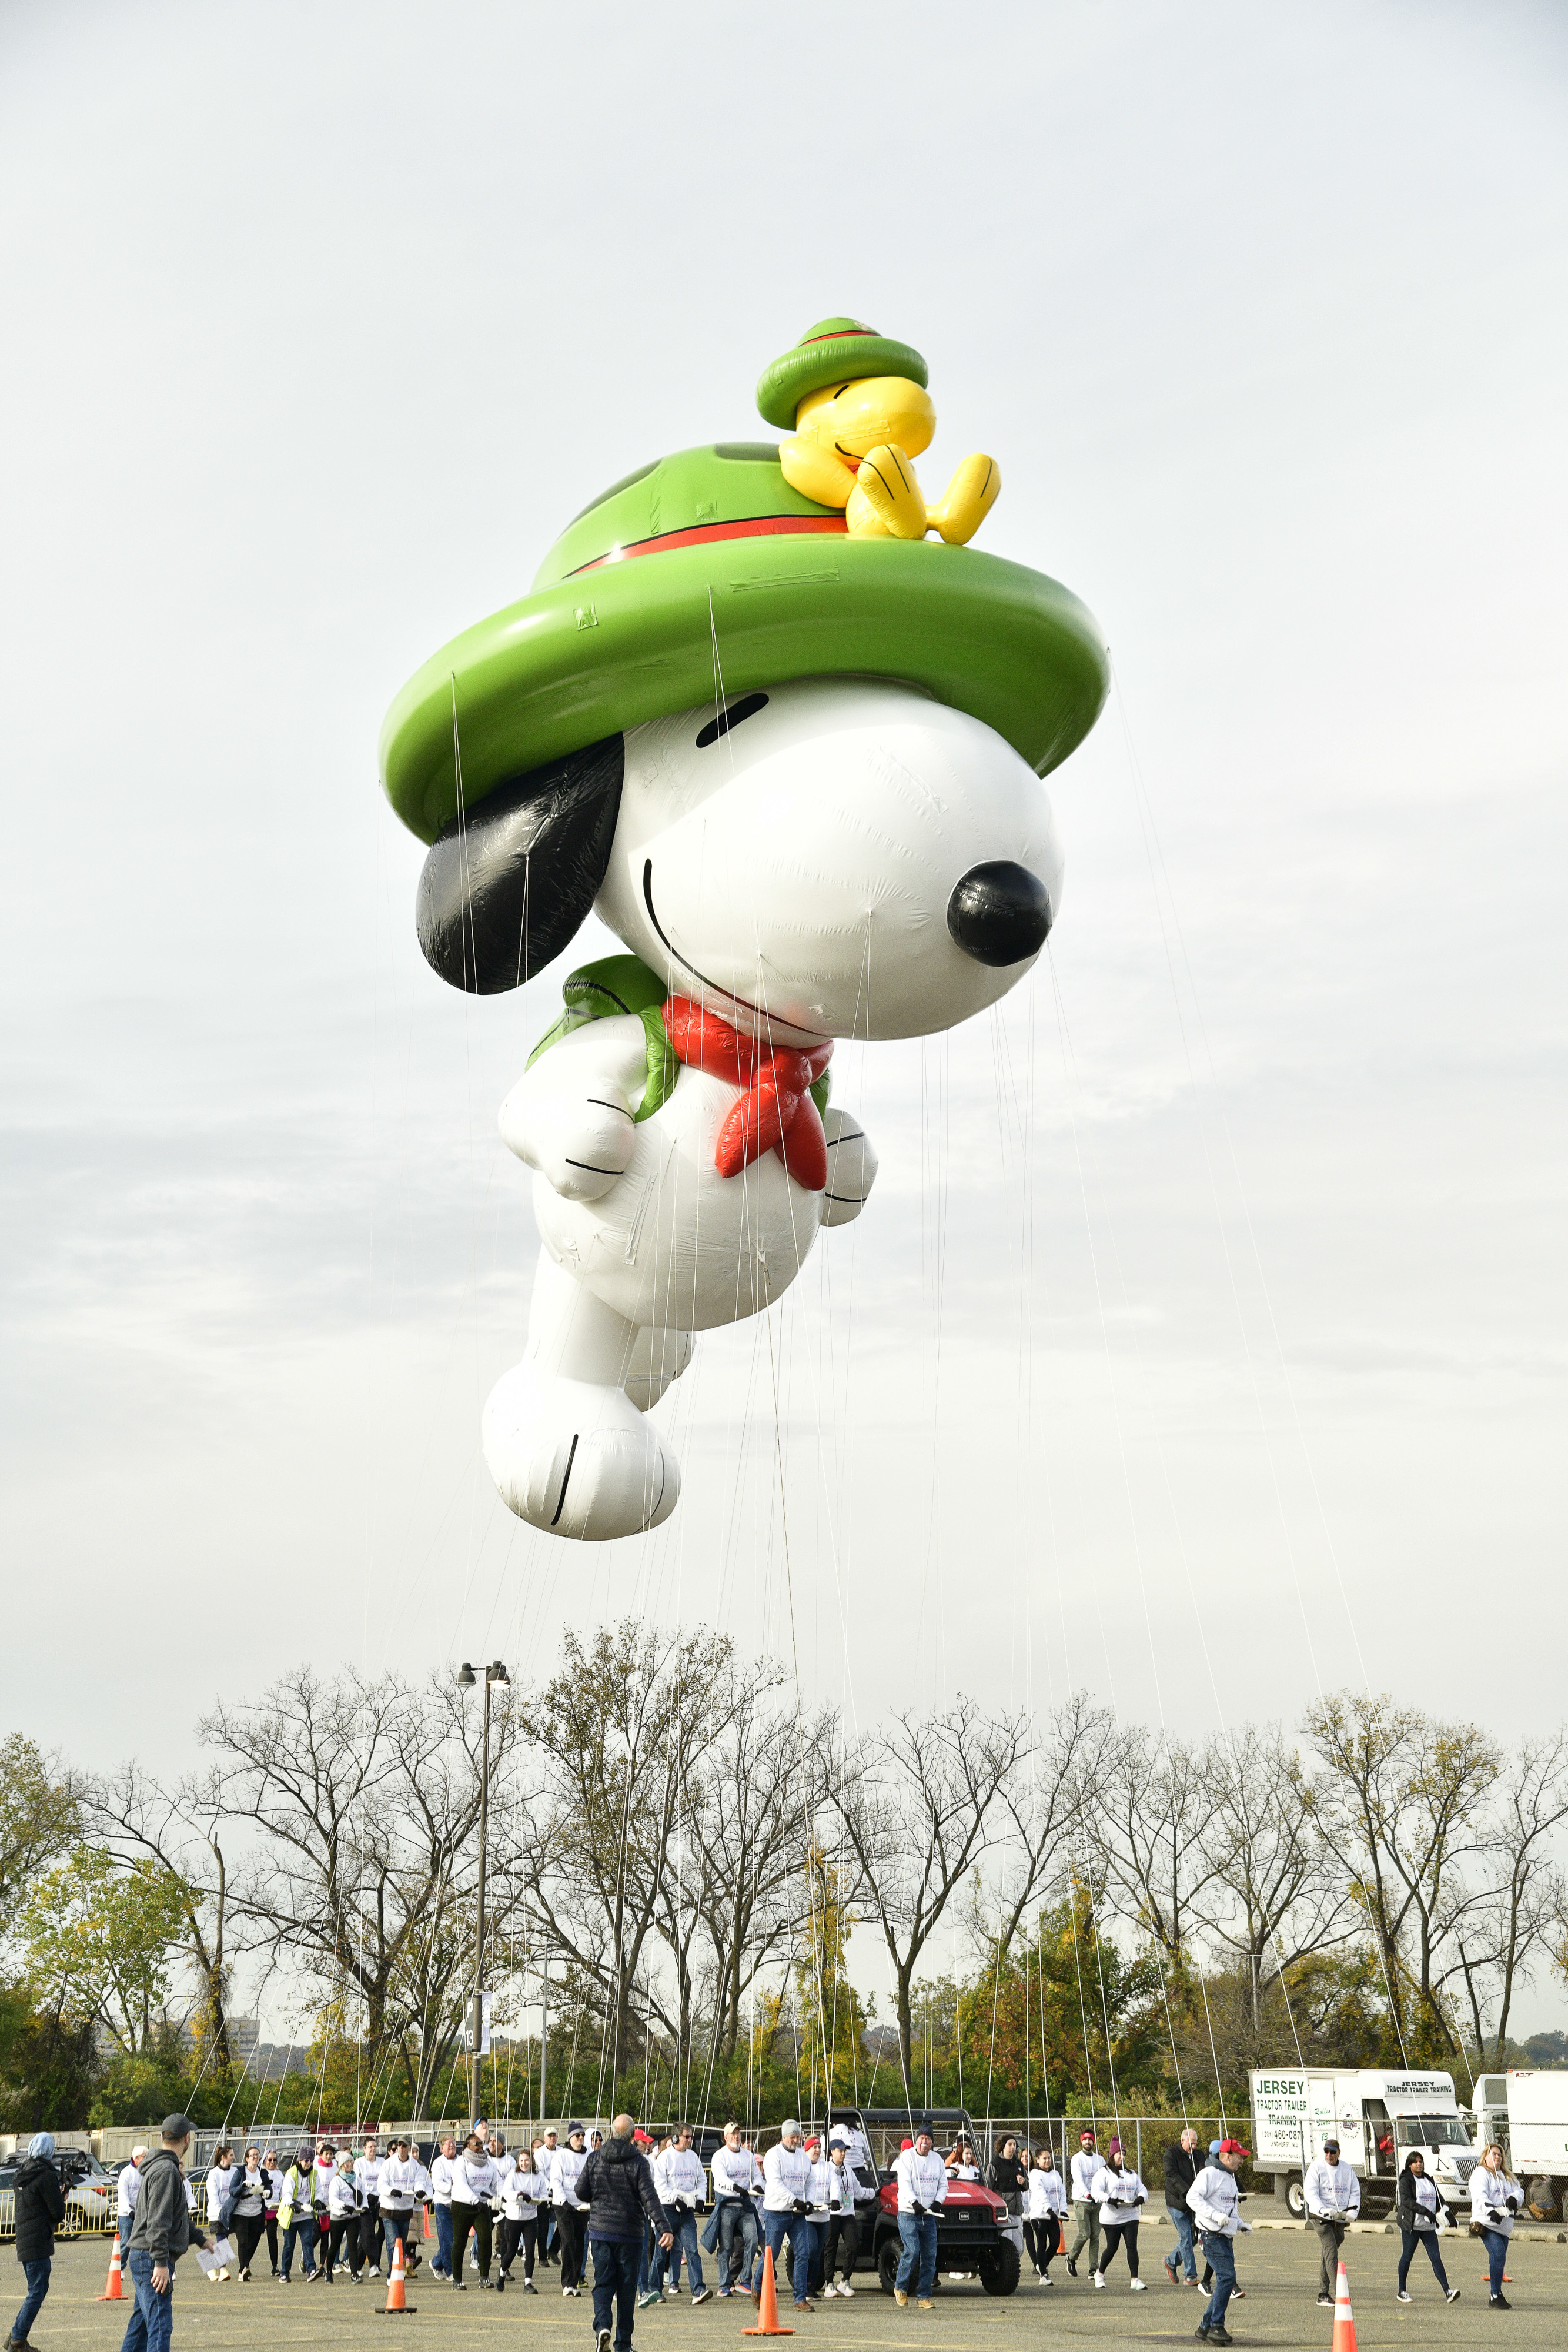 The Beagle Scout Snoopy balloon